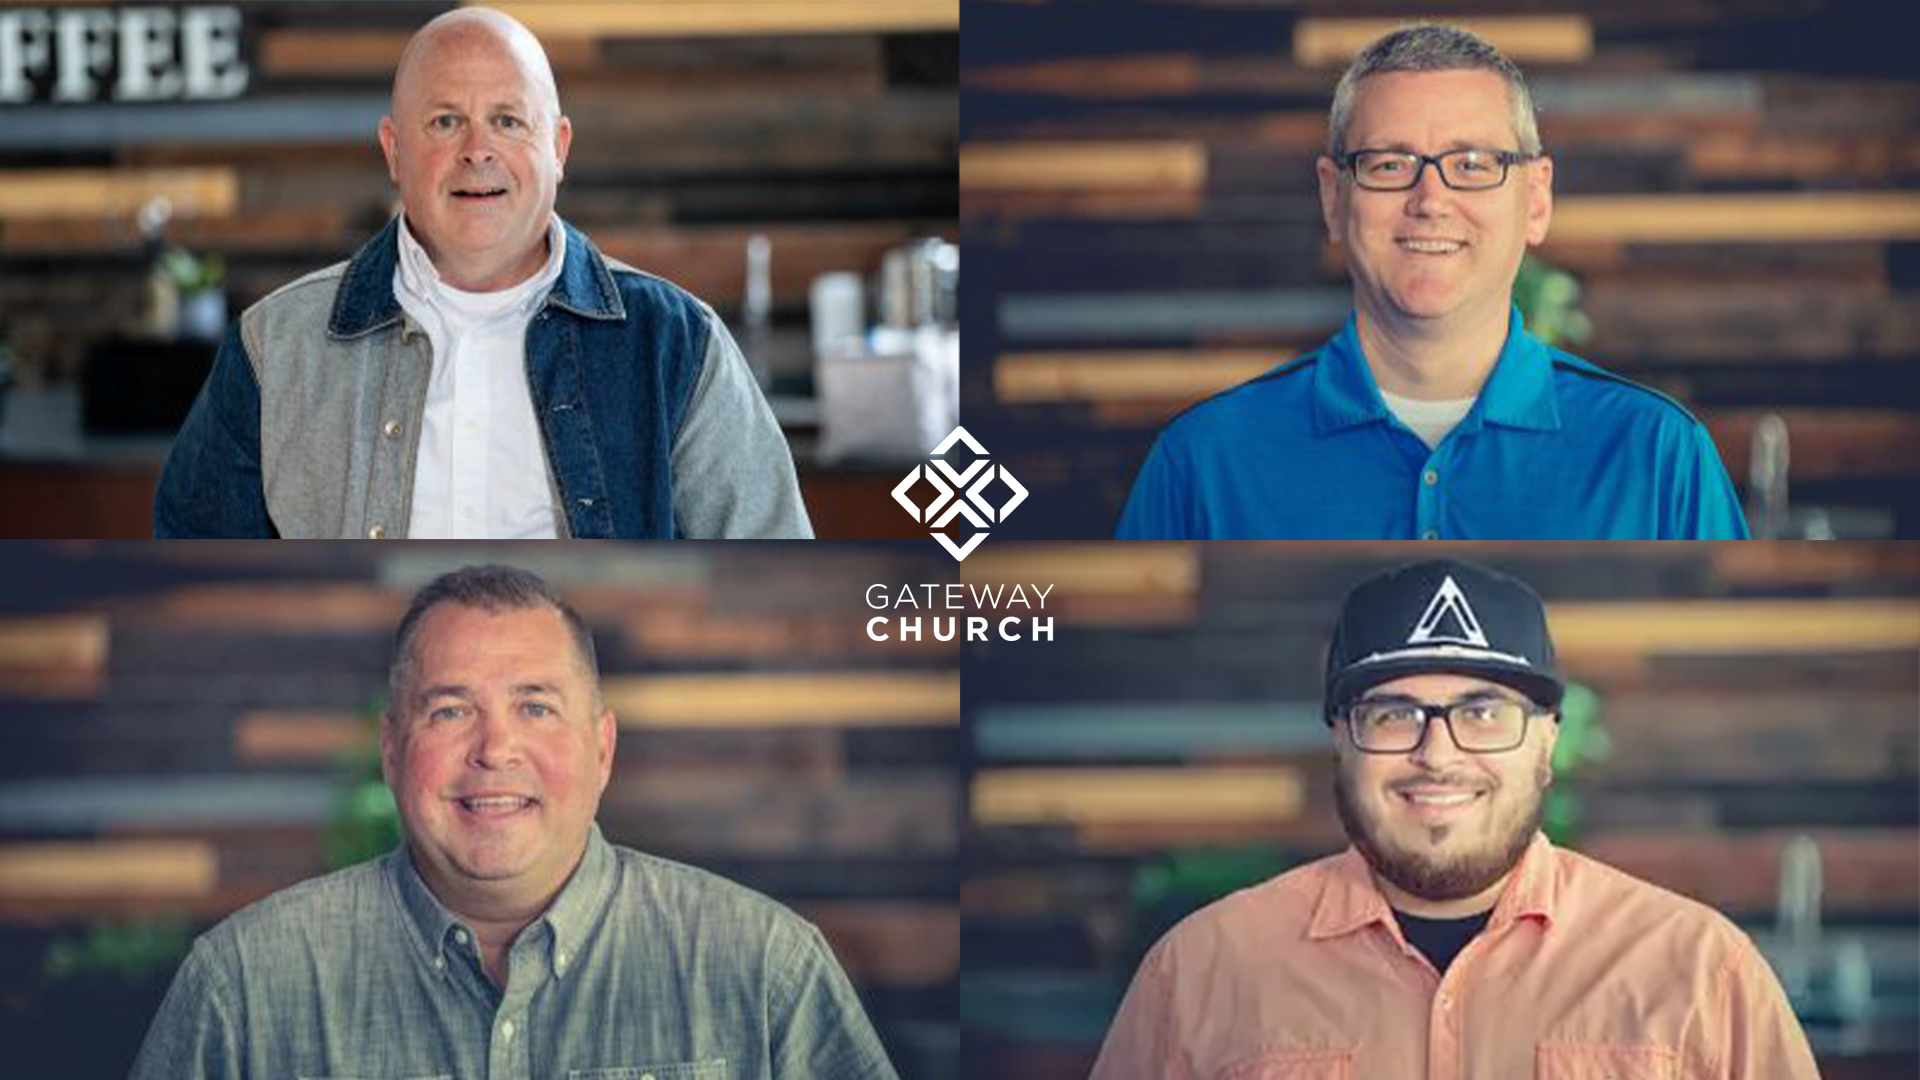 This church planting in PA is lead by Grace Seminary graduates. Read how the are using teamwork in ministry and more about seminary.